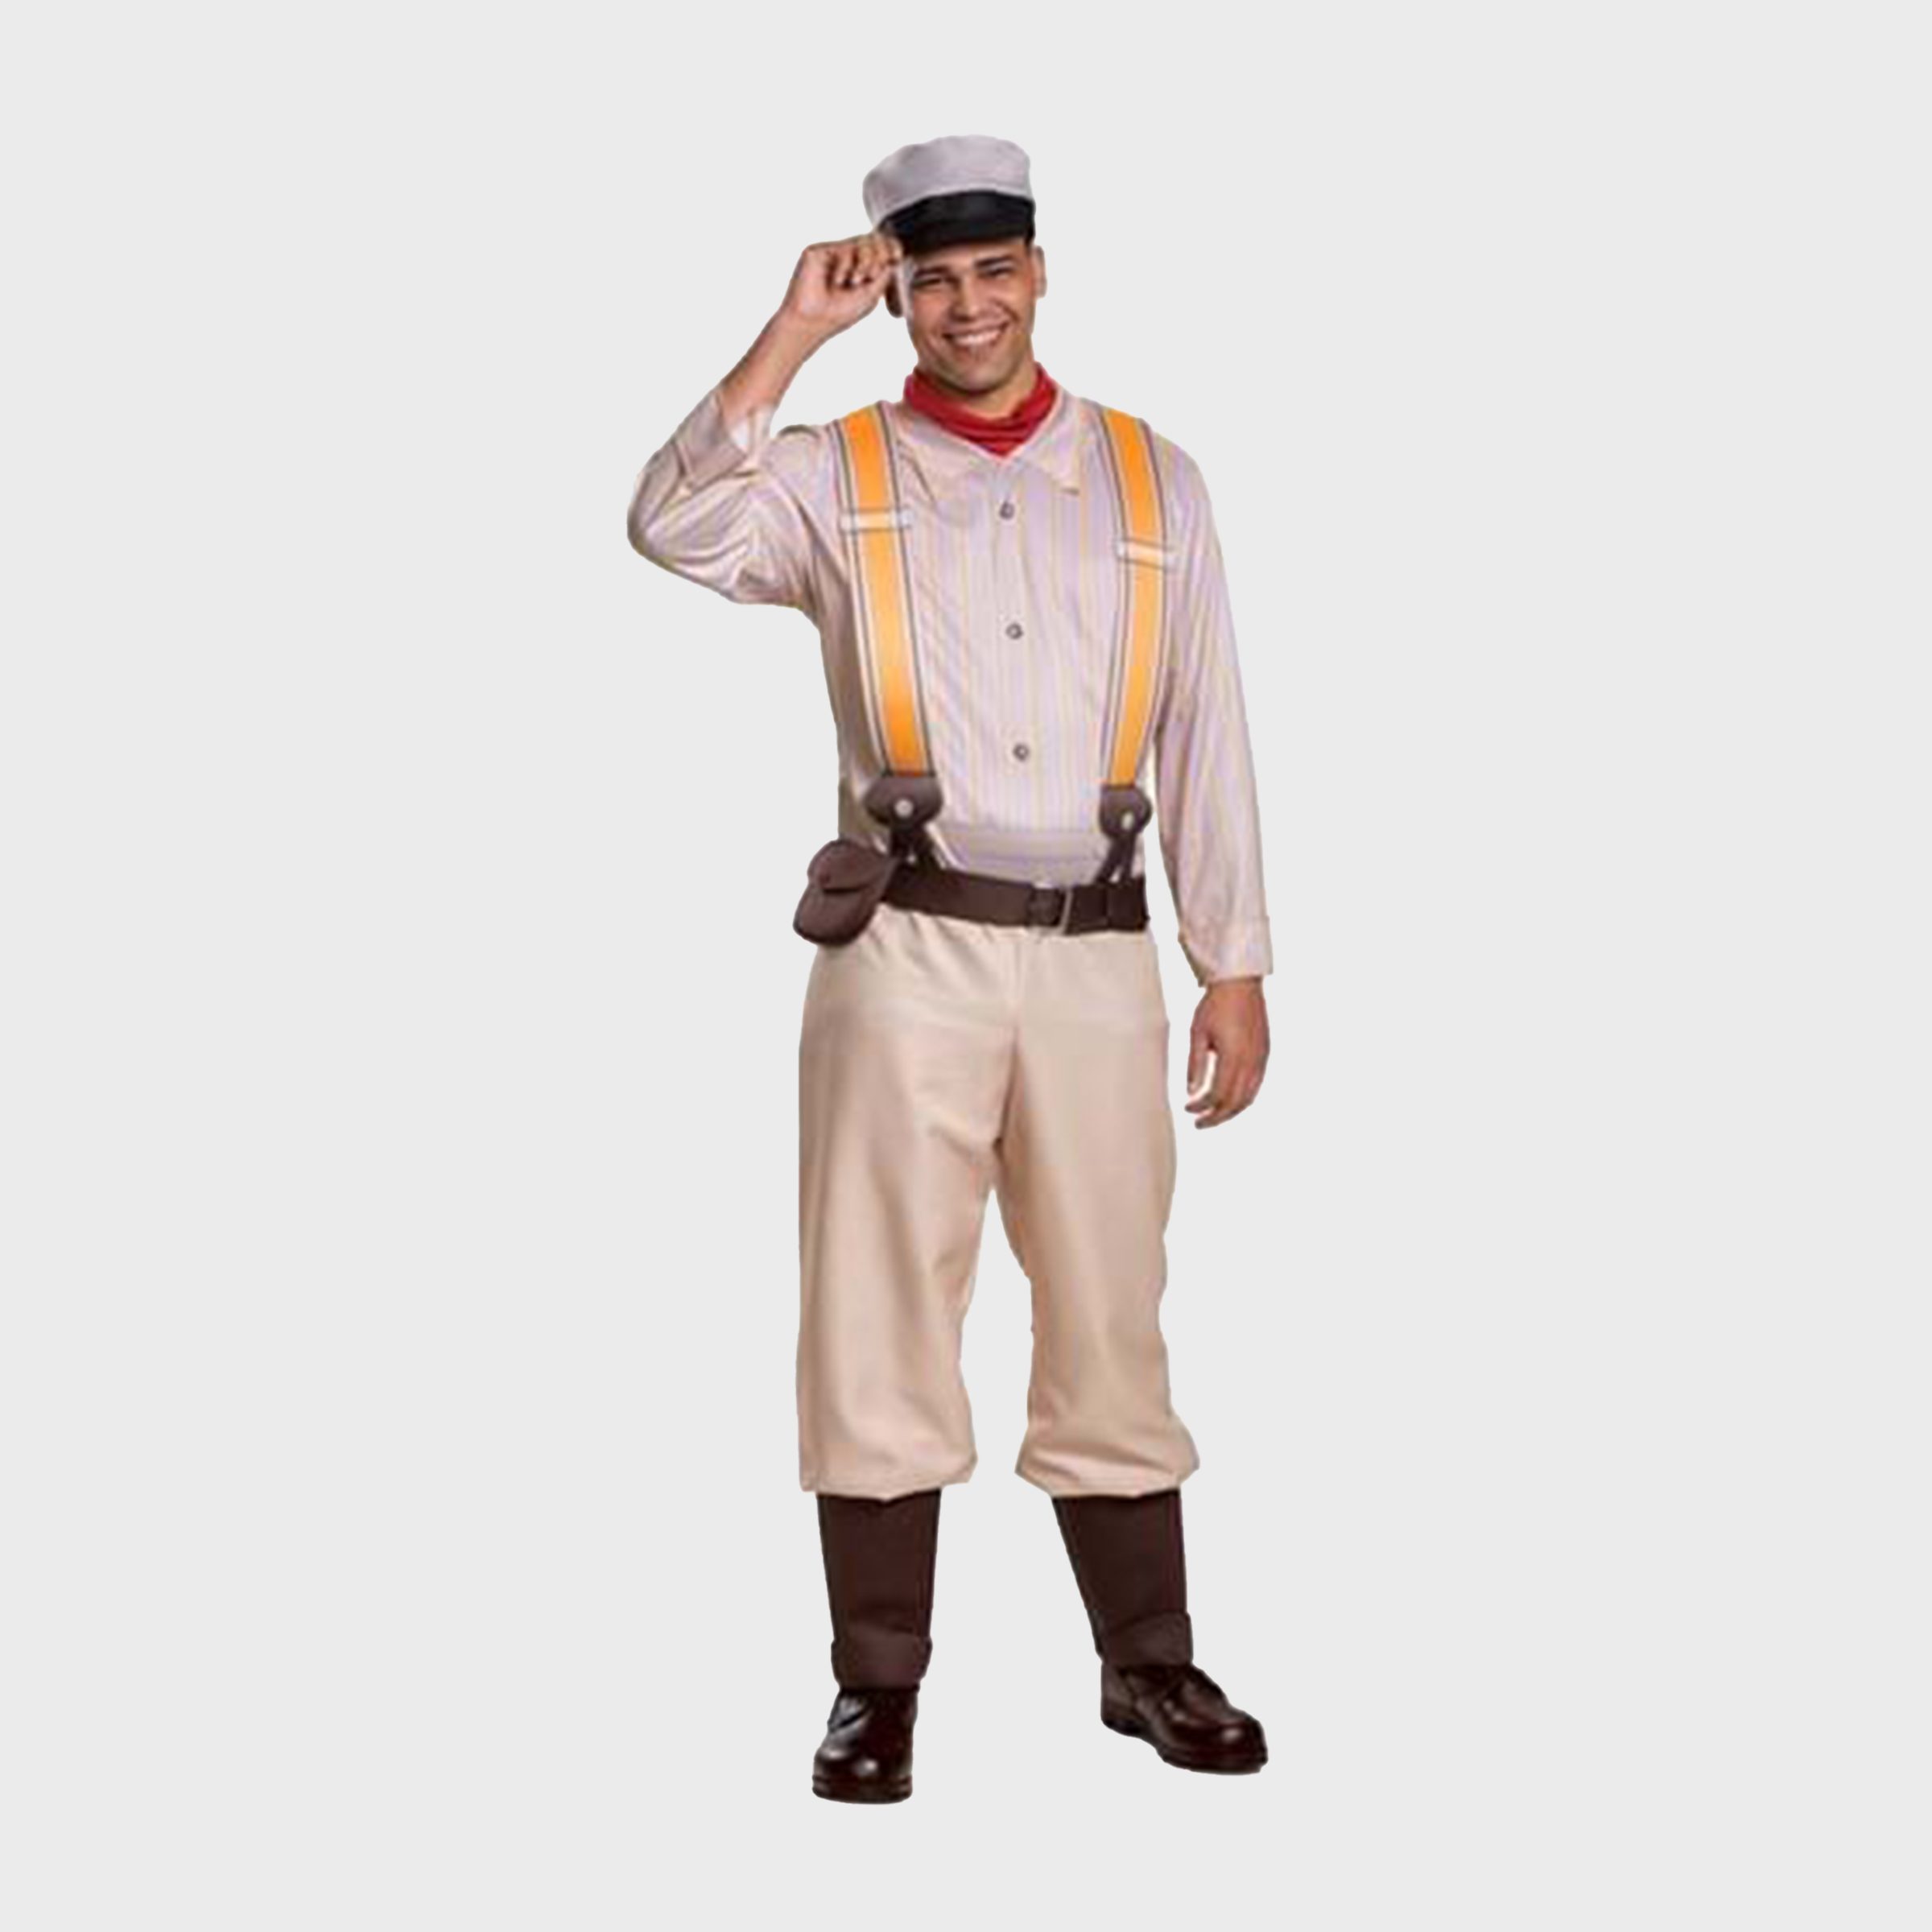 Frank From Jungle Cruise Halloween Costume